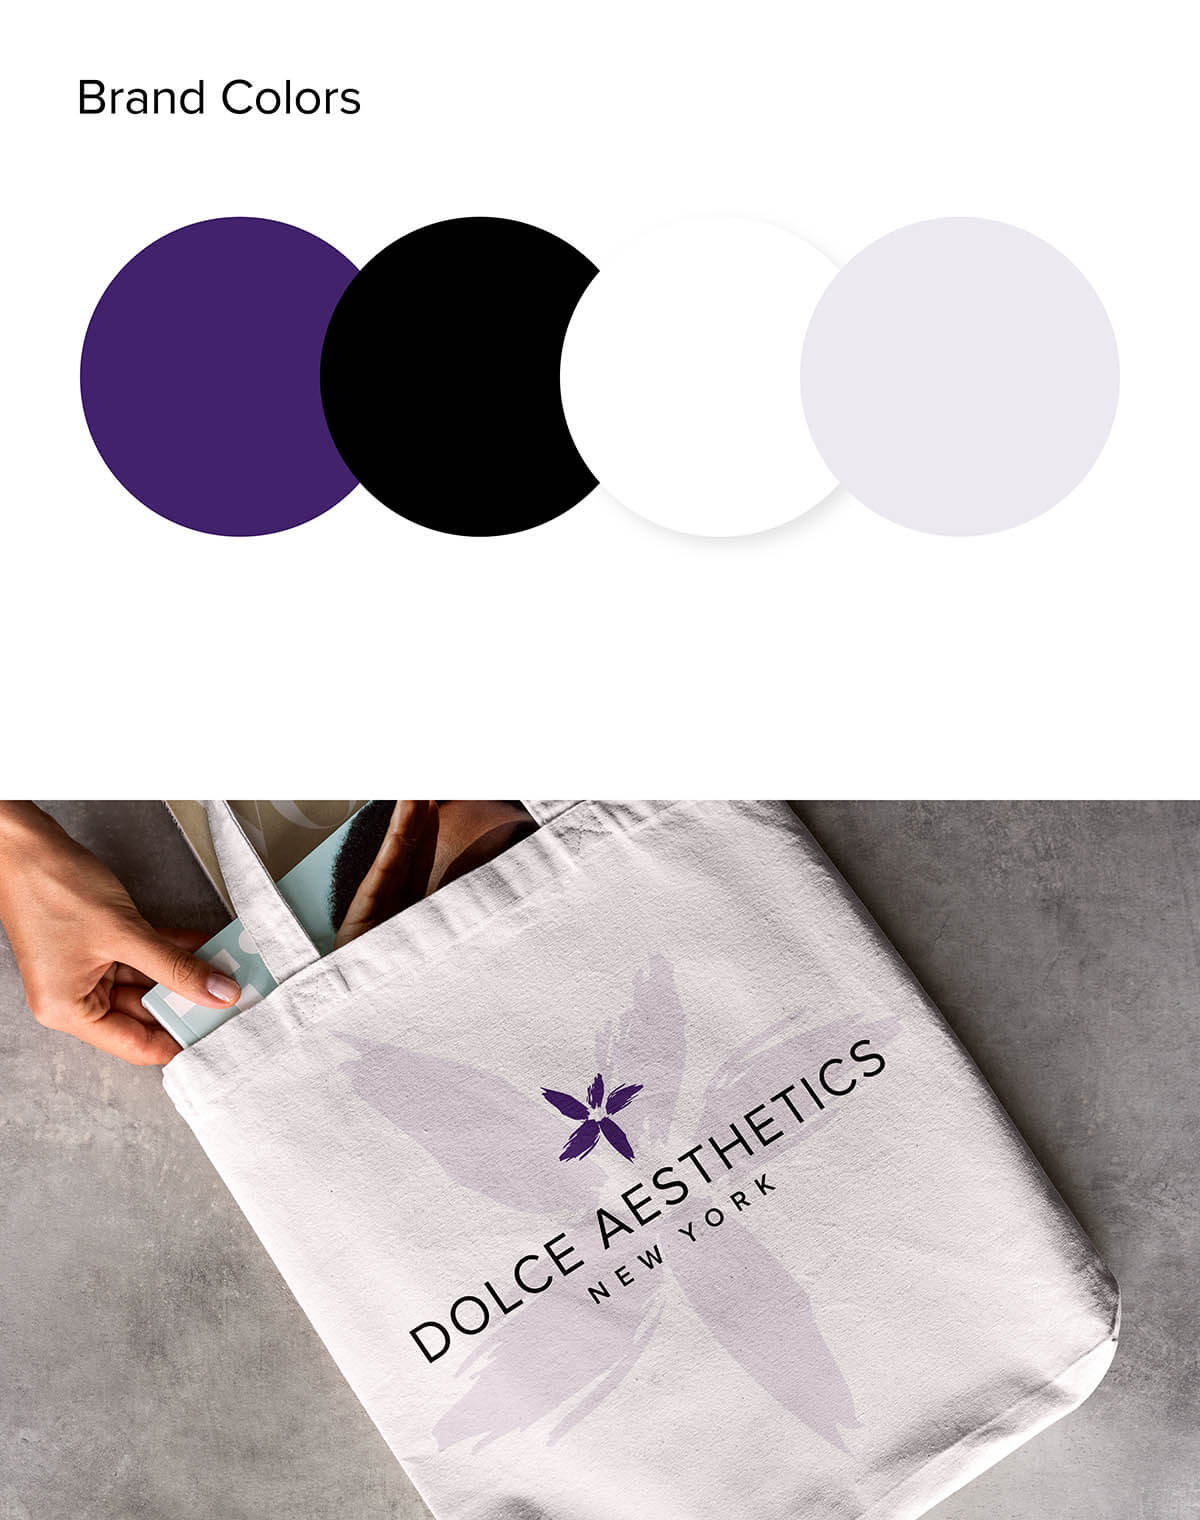 Dolce Aesthetics NY Brand Colors & Tote Bag